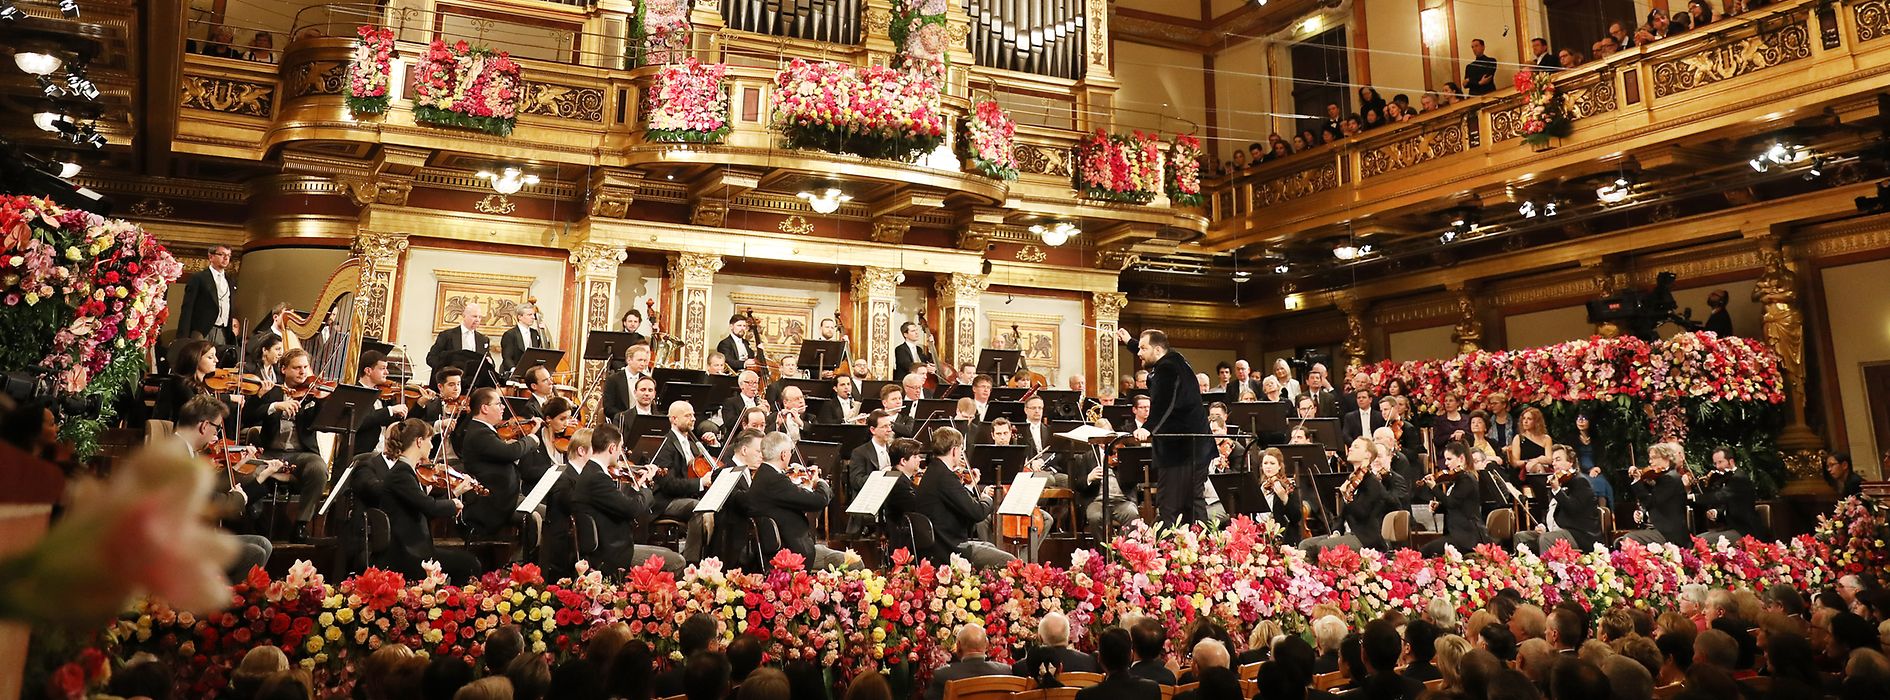 New Year's Concert by the Vienna Philharmonic in the Golden Hall of the Musikverein